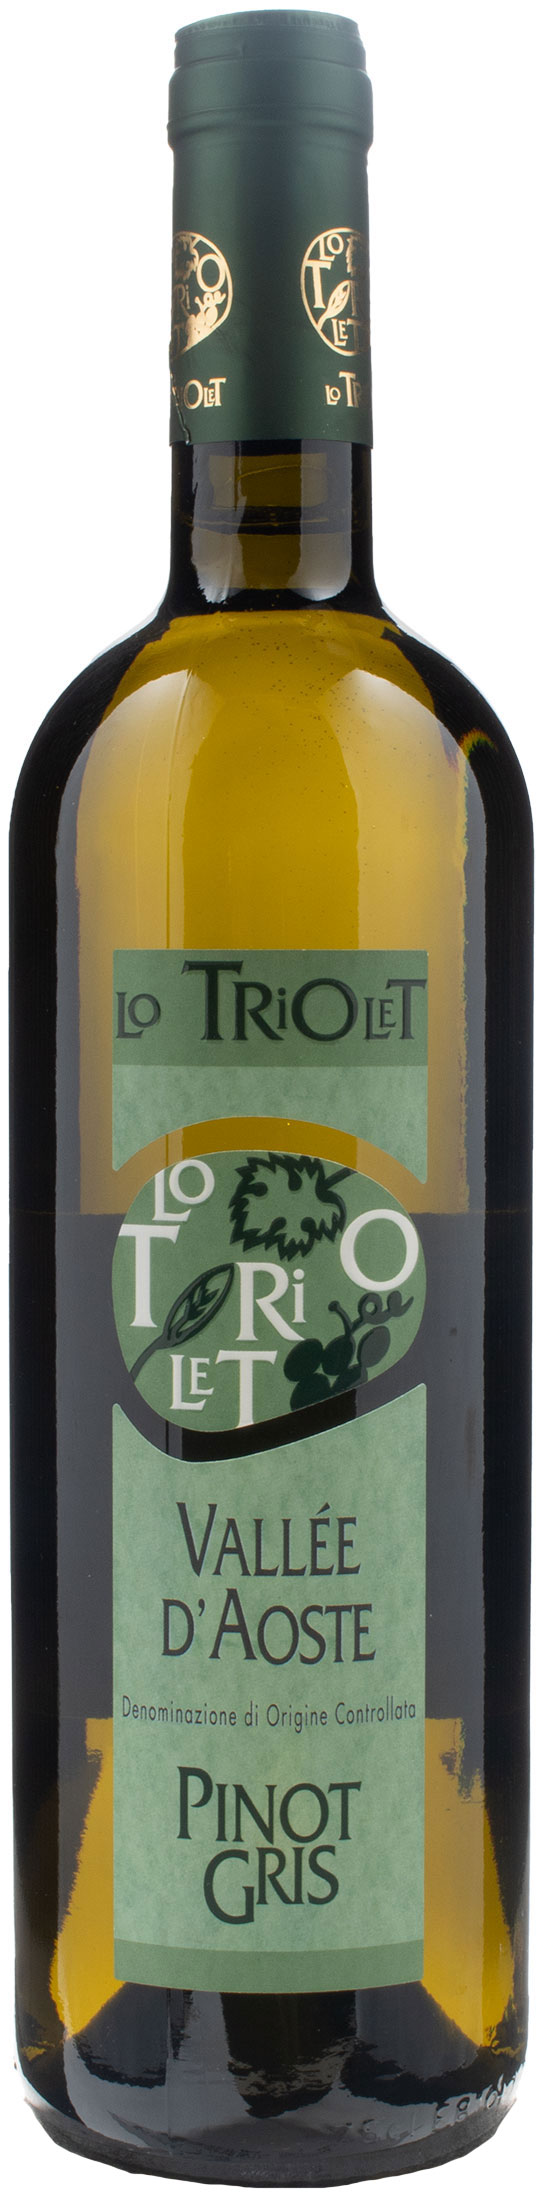 Lo Triolet Pinot Gris